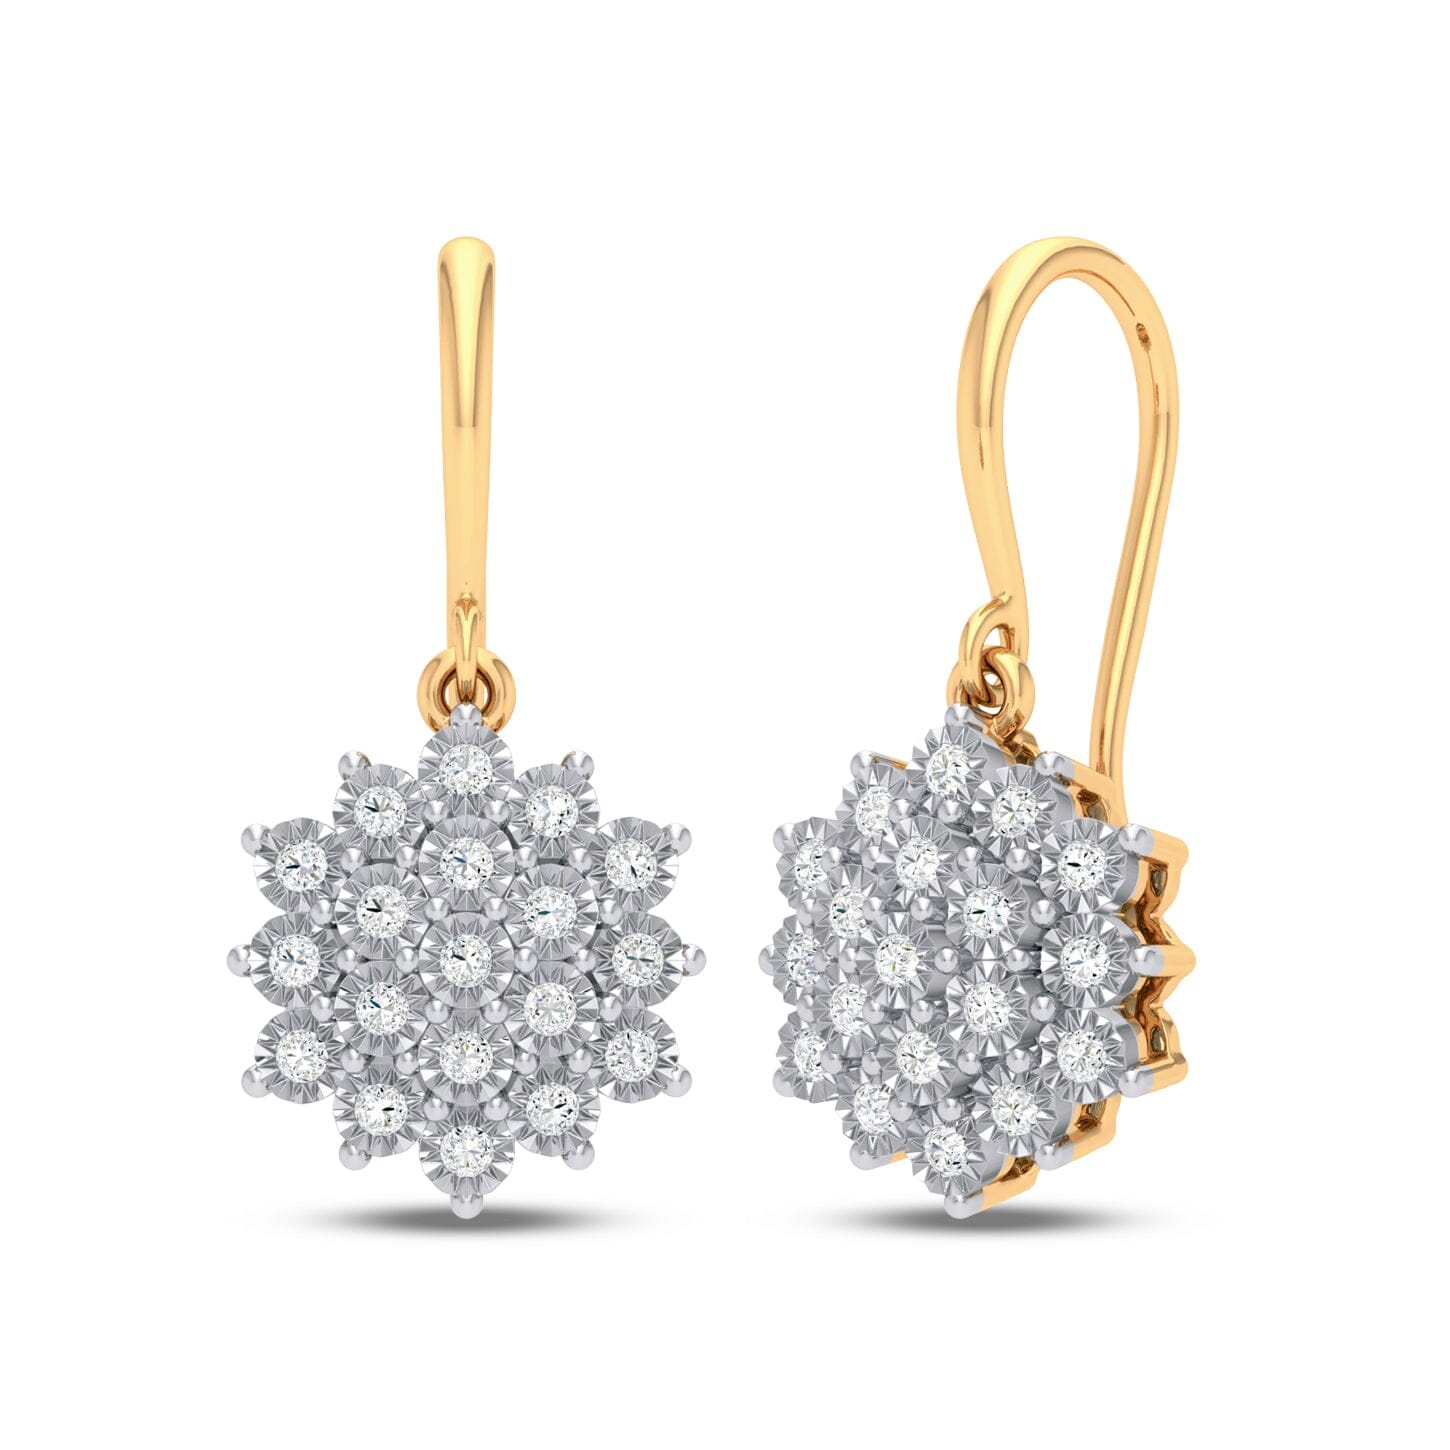 9ct Yellow Gold Flower Drop Earrings with 0.14ct of Diamonds Earrings Bevilles 